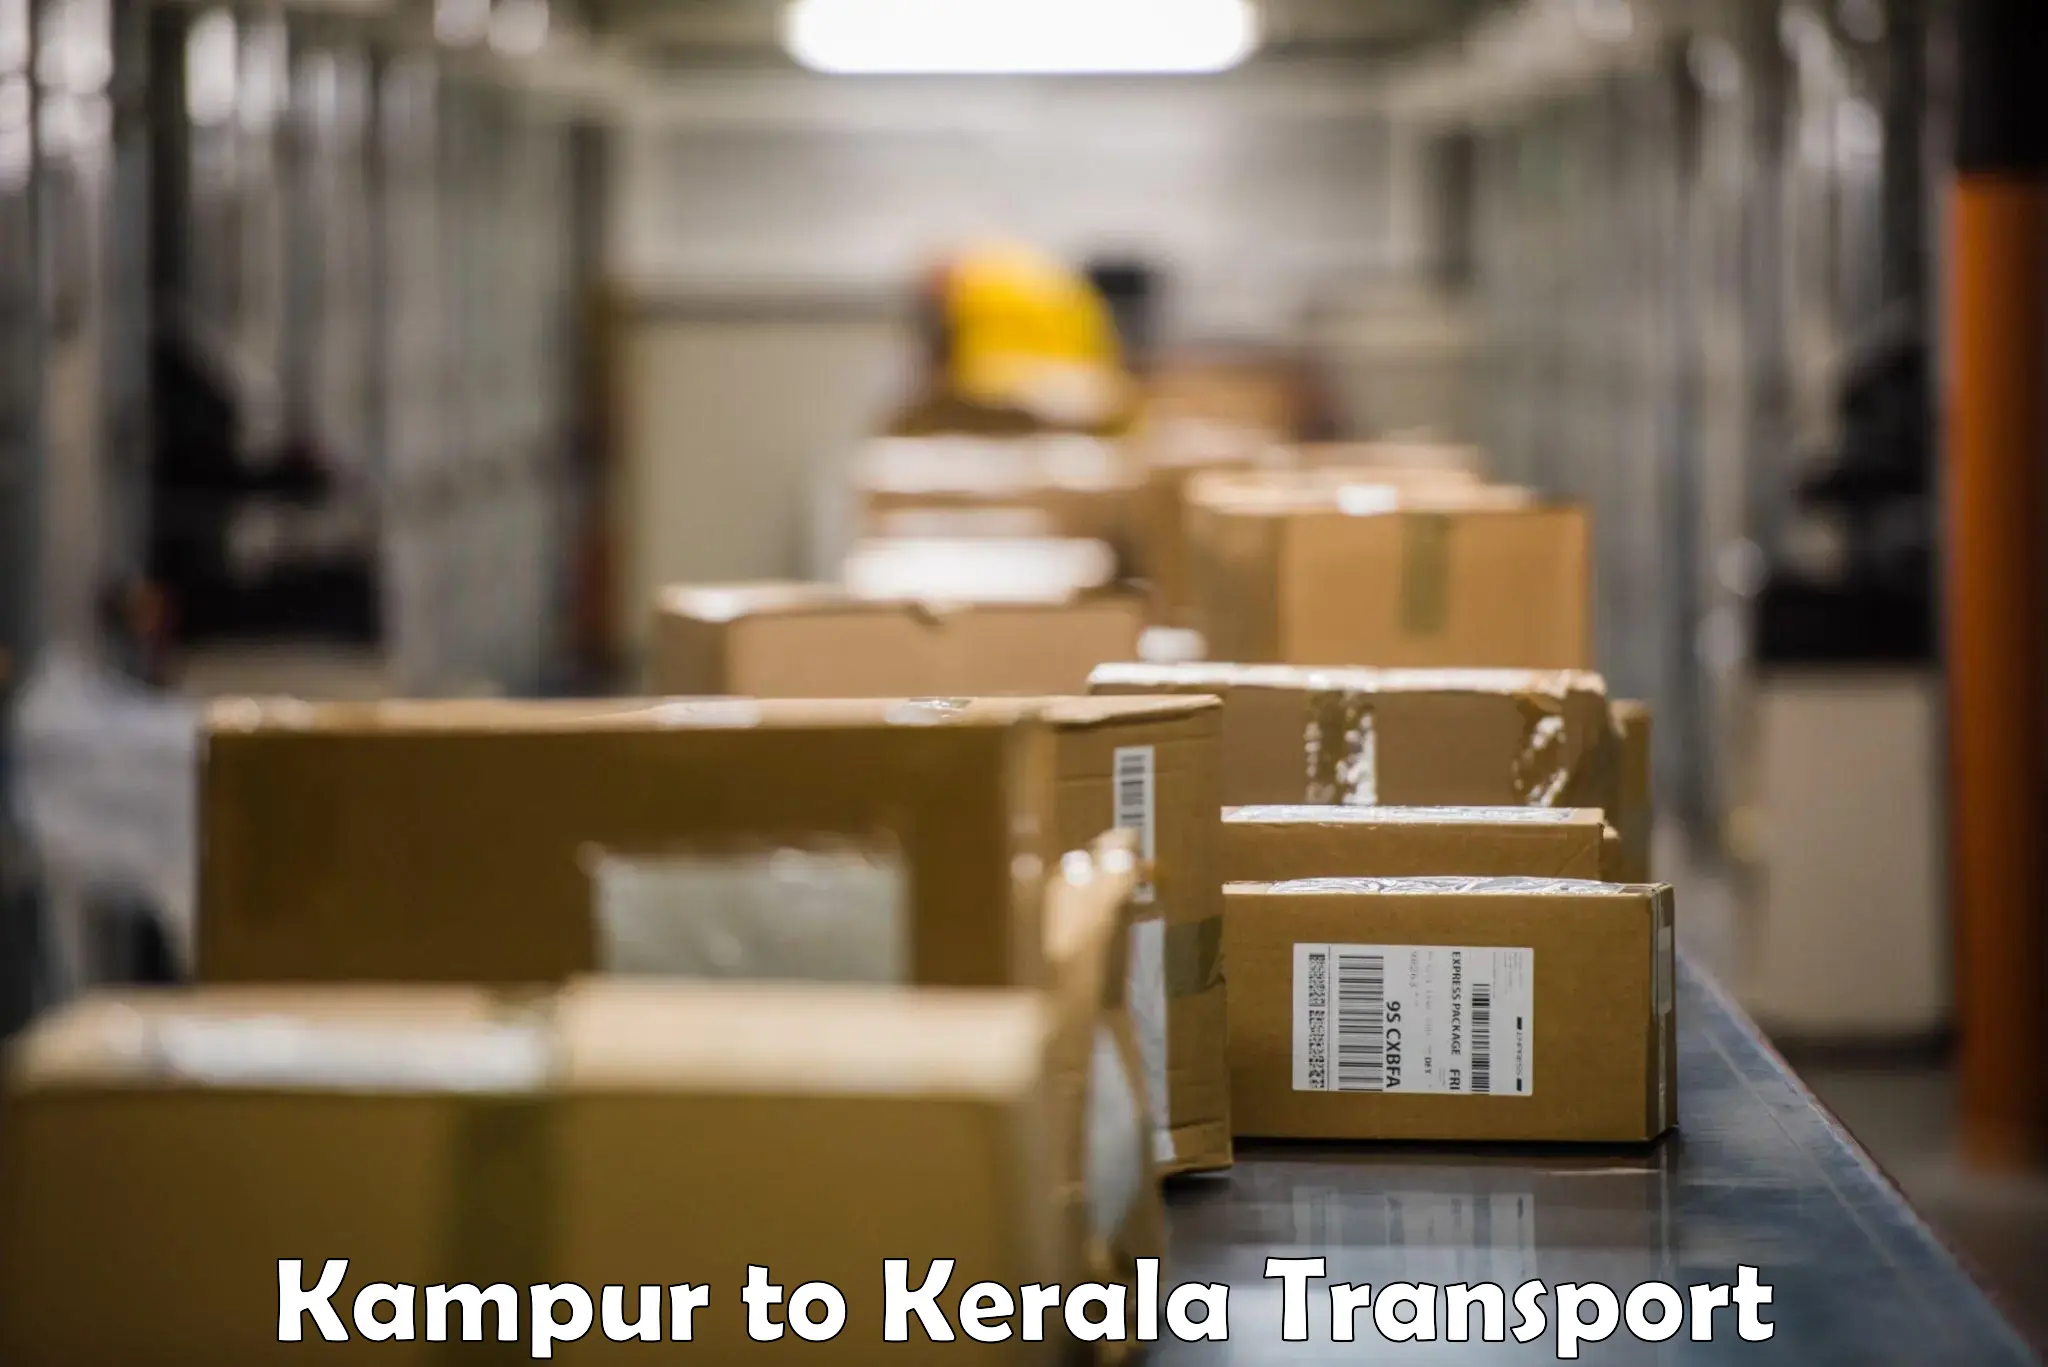 Goods delivery service Kampur to Edavanna